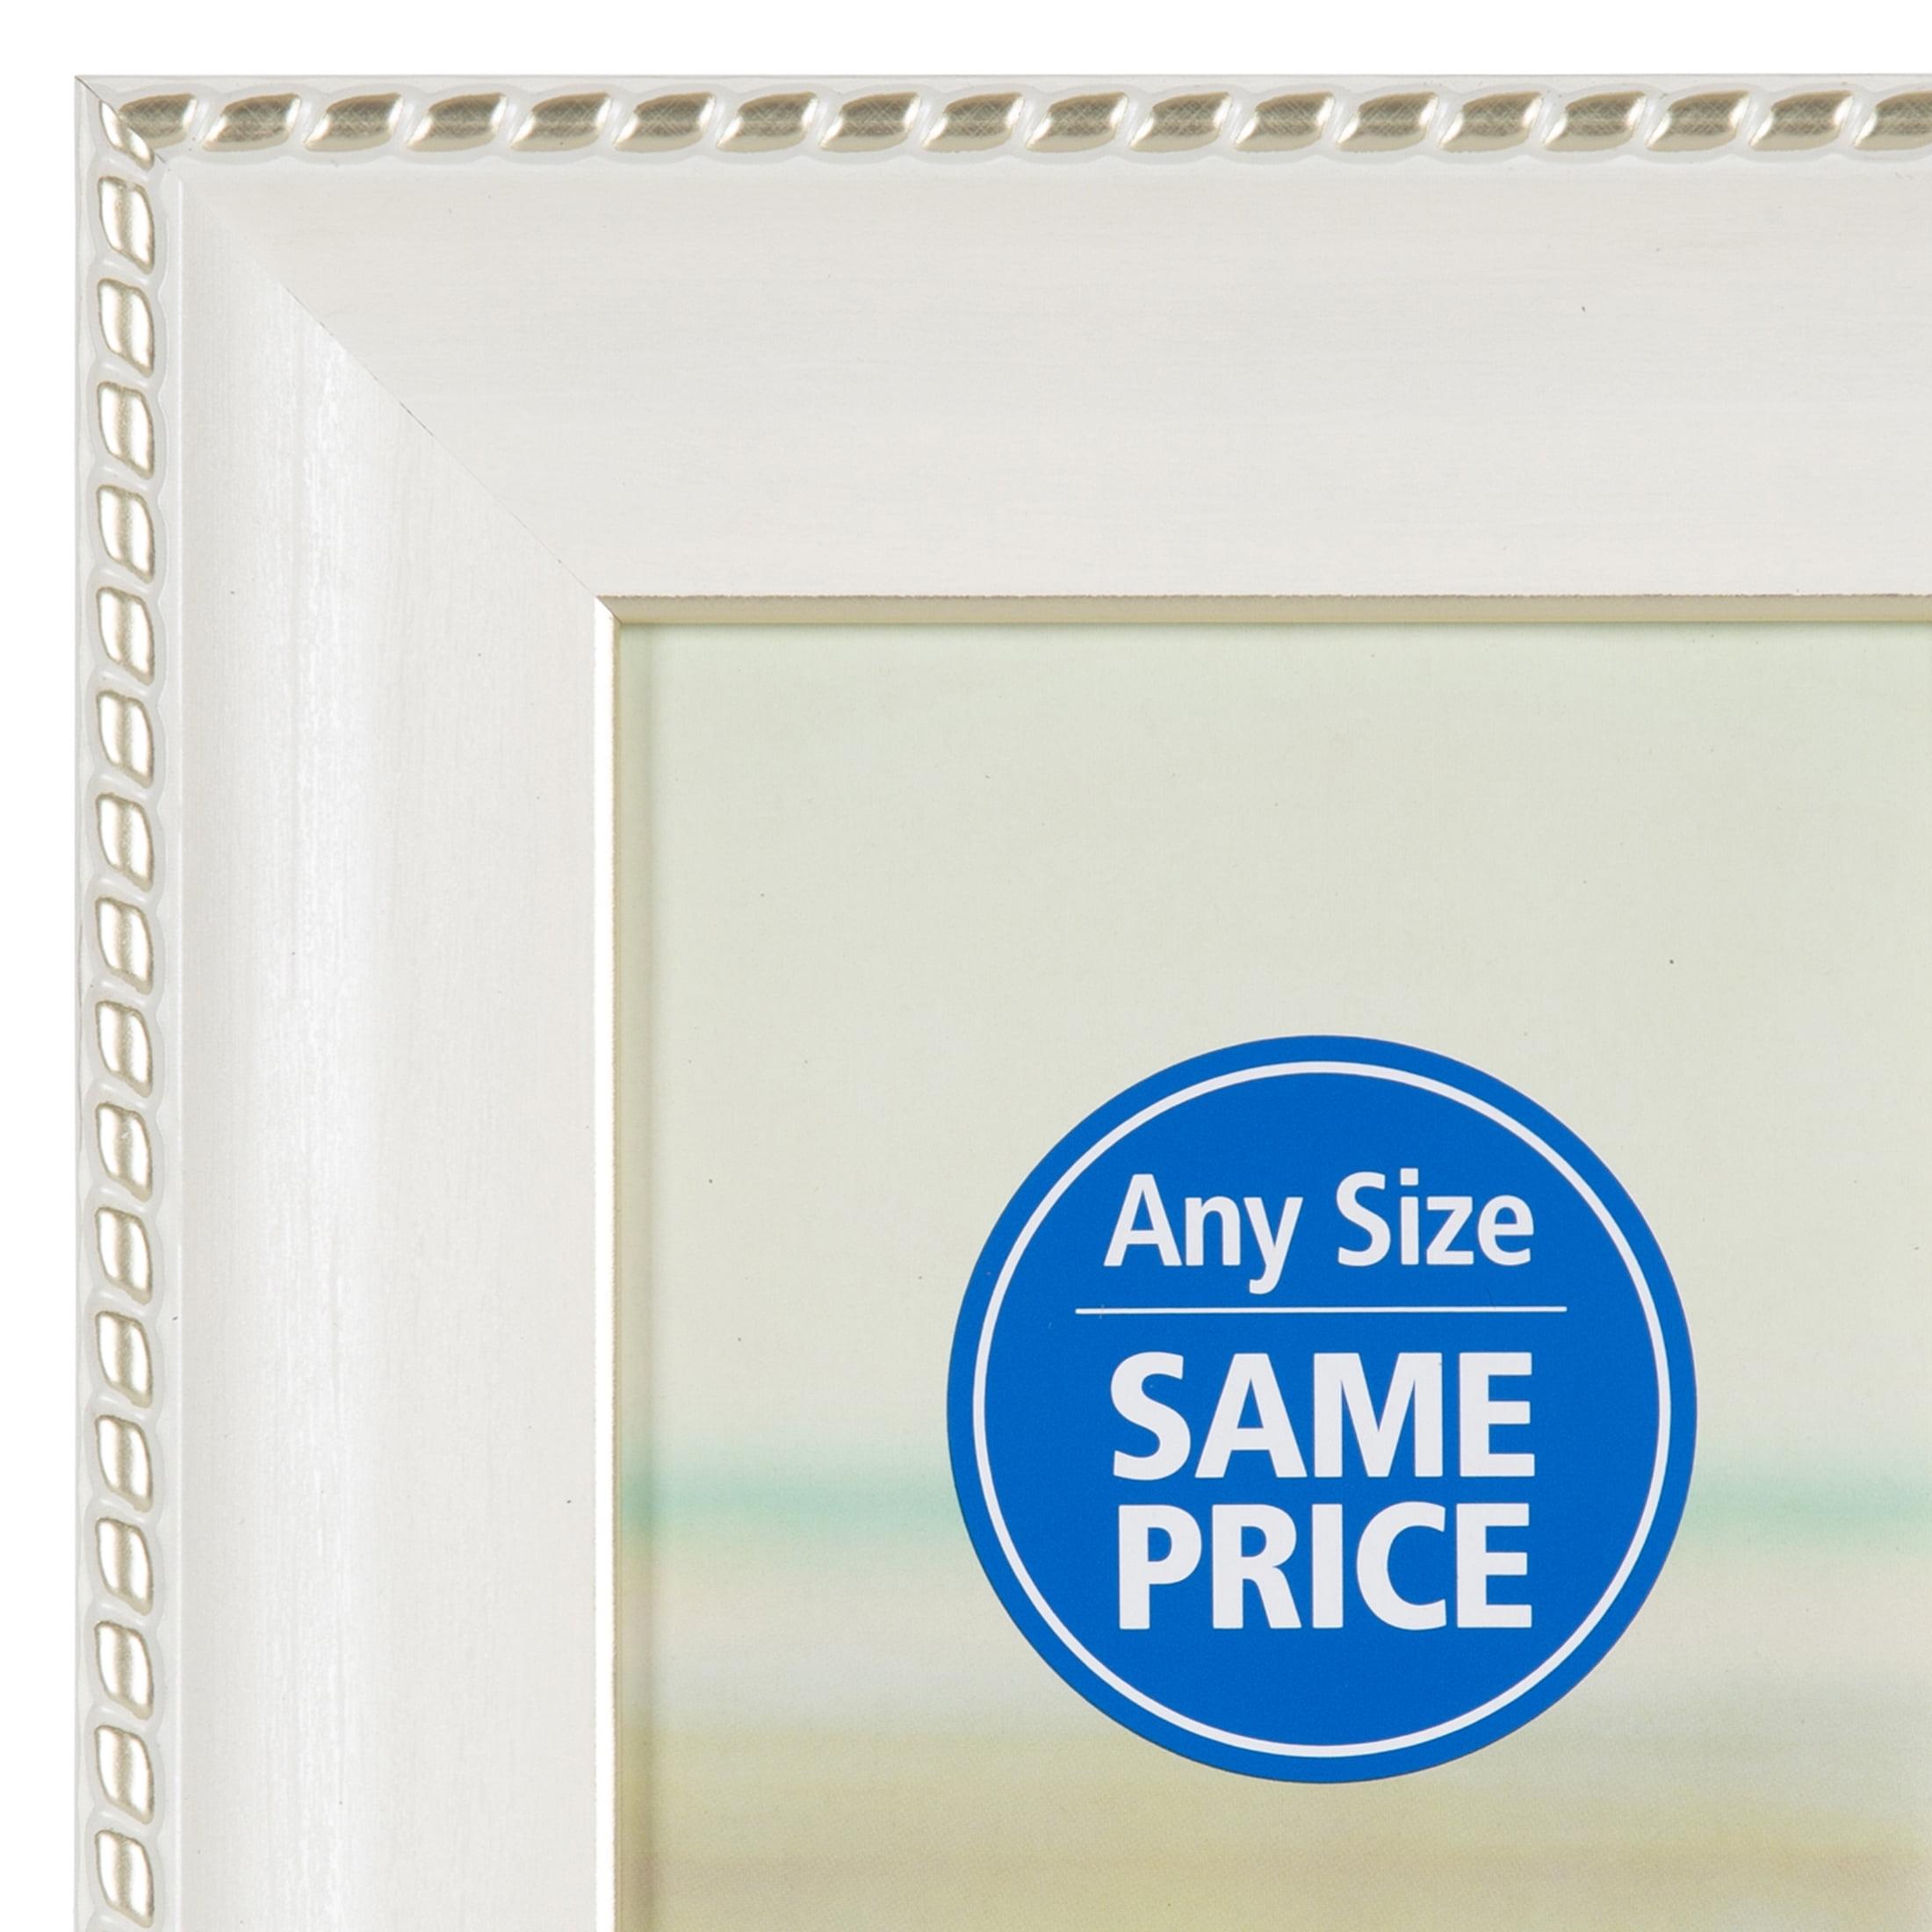 Monolike Standing Paper Photo Frame 5x7 White 10p 5x7inch Size